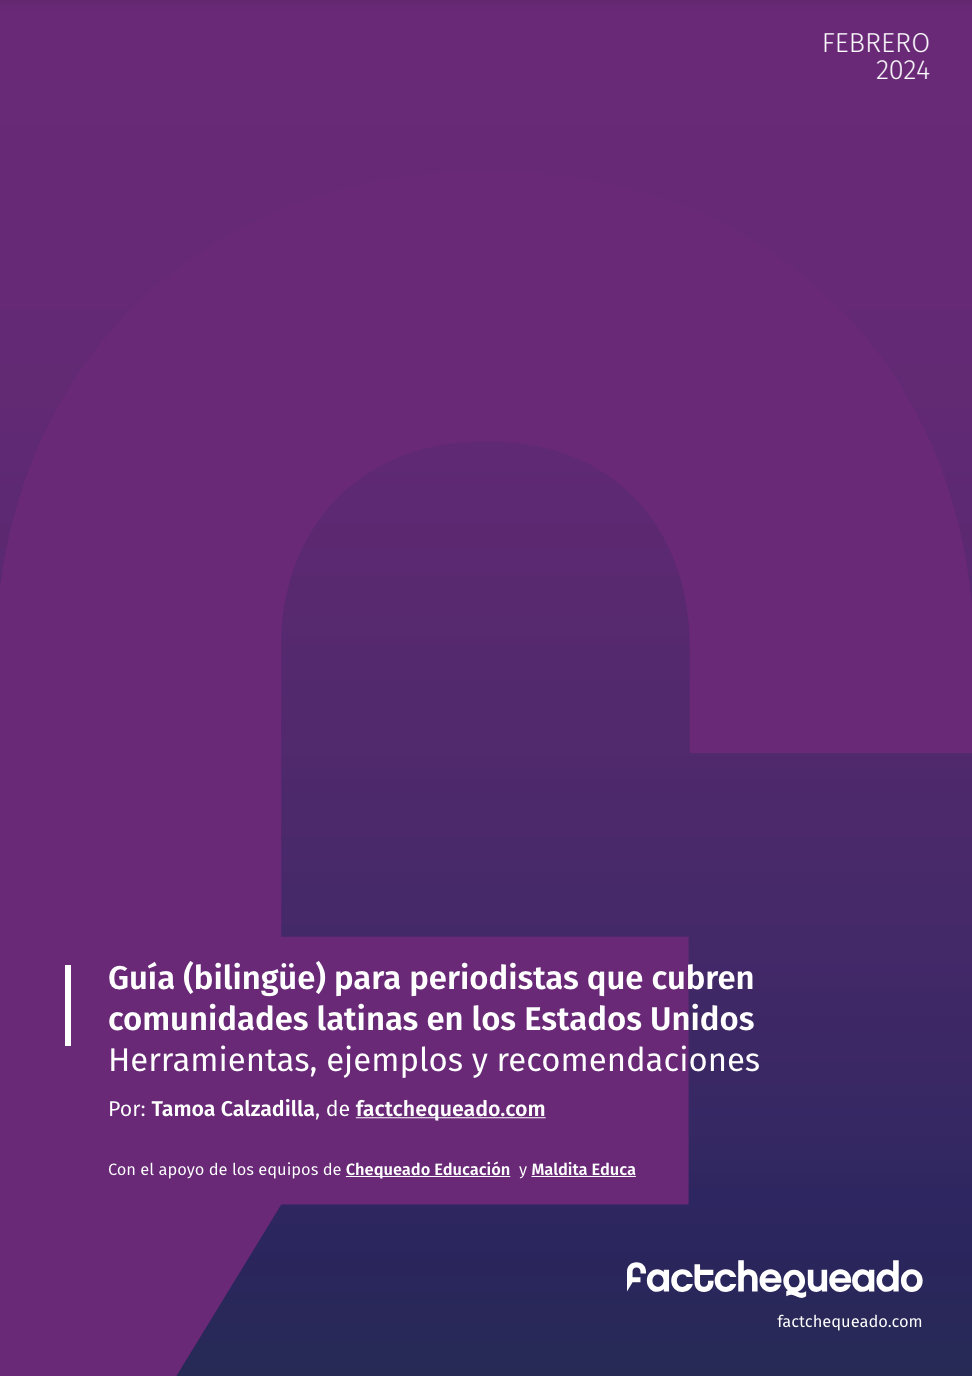 Cover of the PDF version of Factchequeado's bilingual guide for journalists.